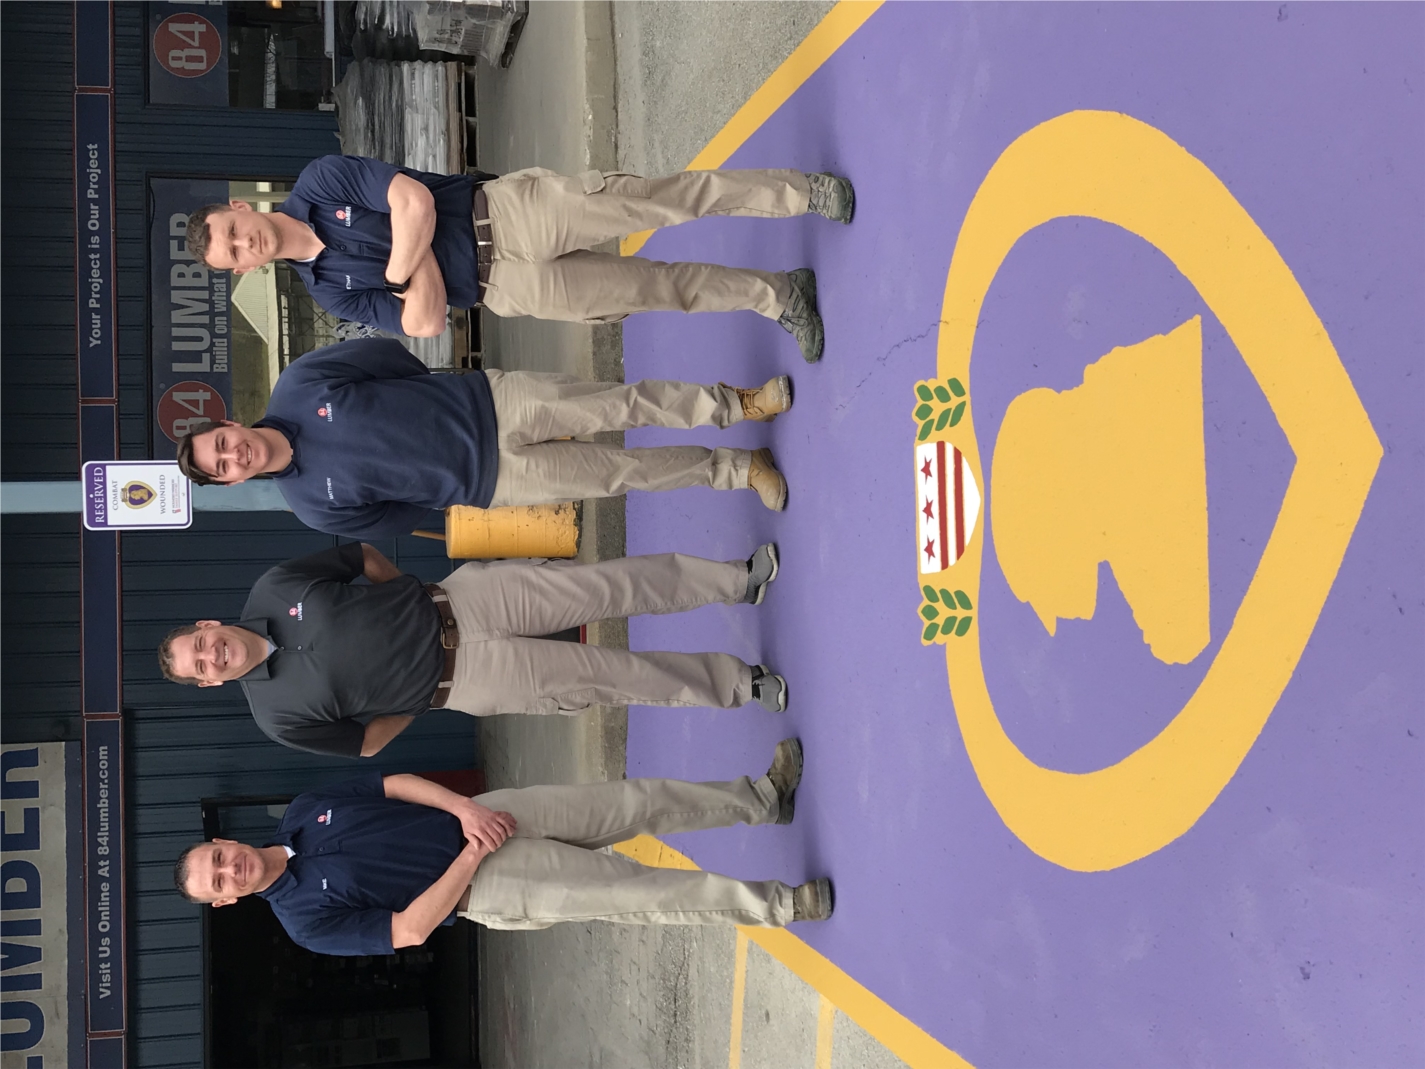 Dedicated Combat Wounded parking spot with Purple Heart insignia outside of Eighty Four, PA, store

There are purple parking spots at every 84 Lumber location nationwide. Not all have the insignia, but we're in the process of adding it at more locations in the Pittsburgh area.